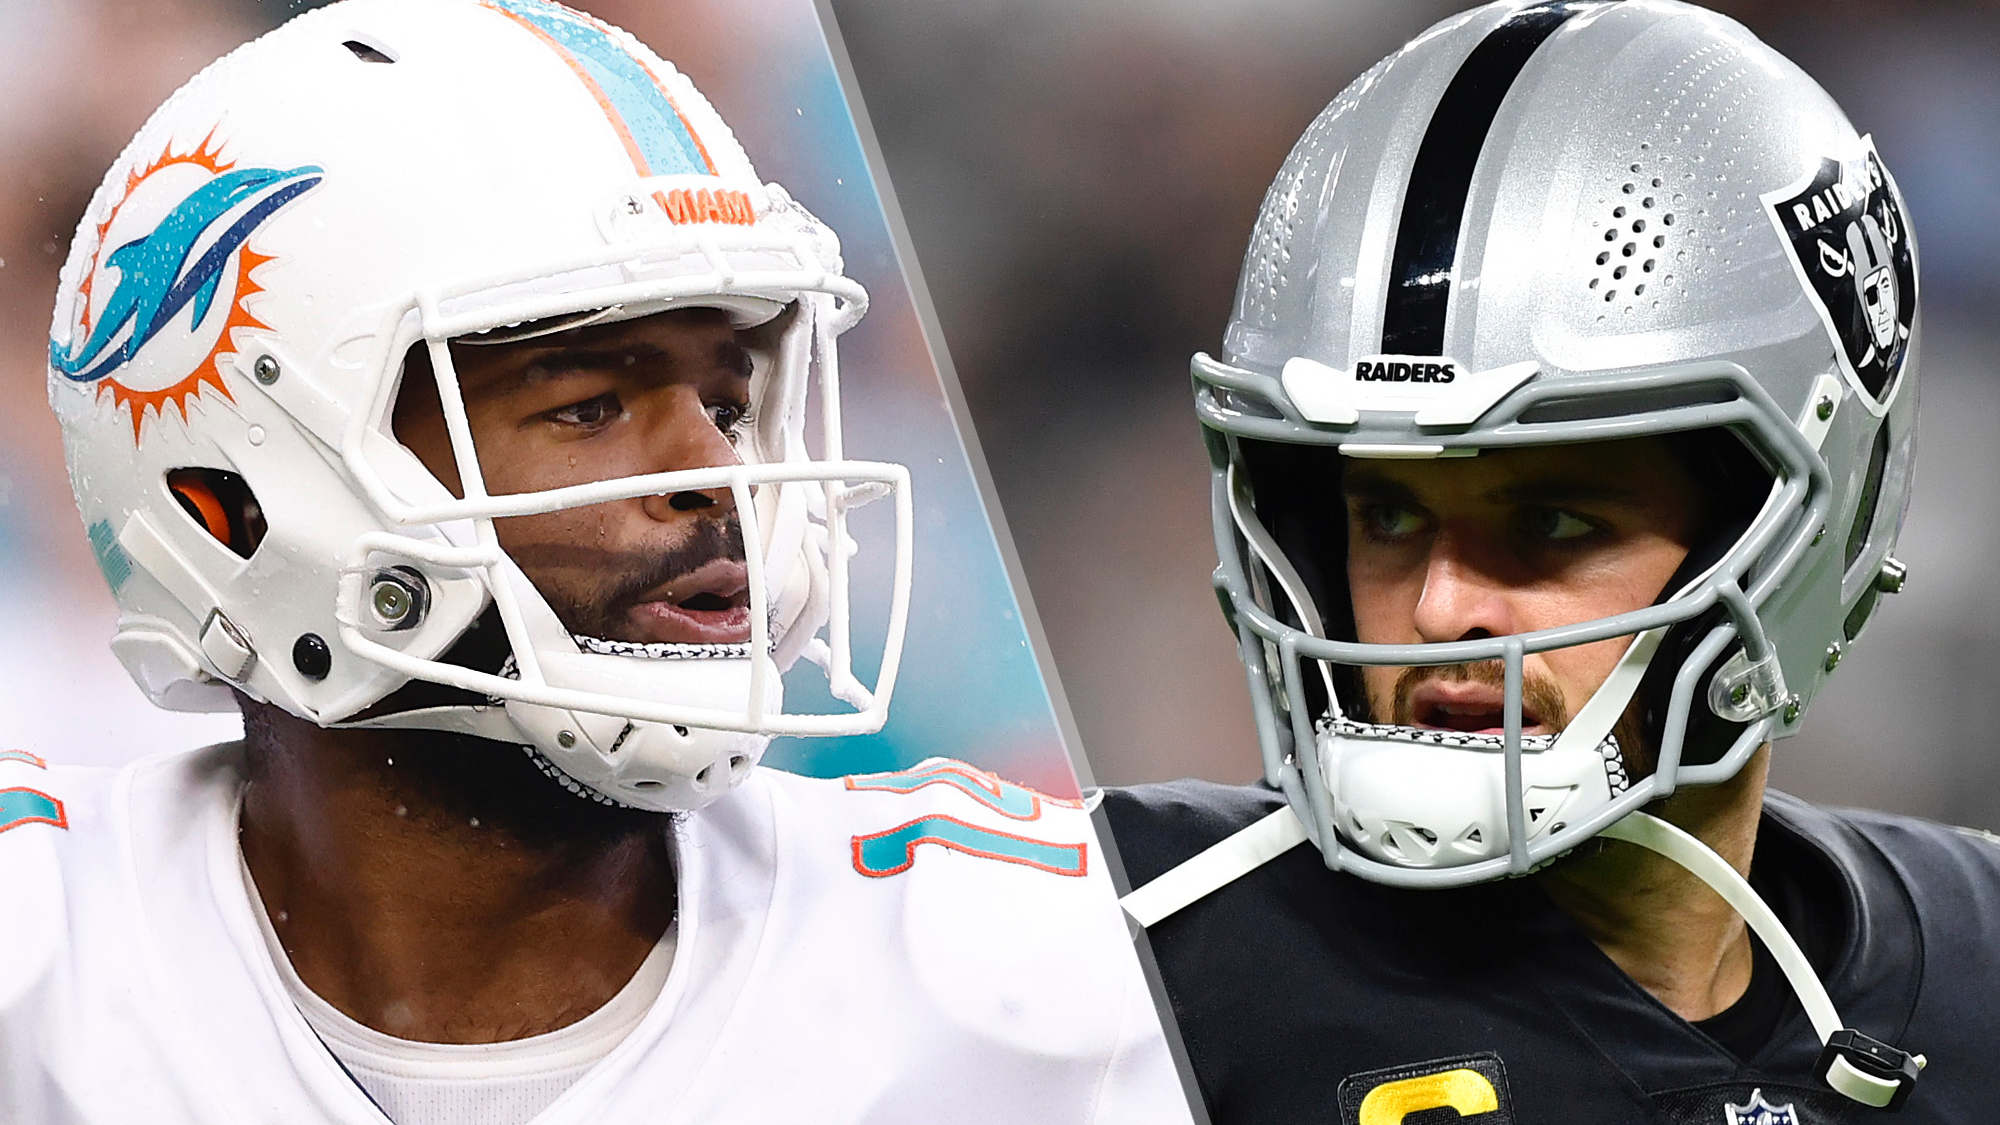 Dolphins vs Raiders live stream: How to watch NFL week 3 game online